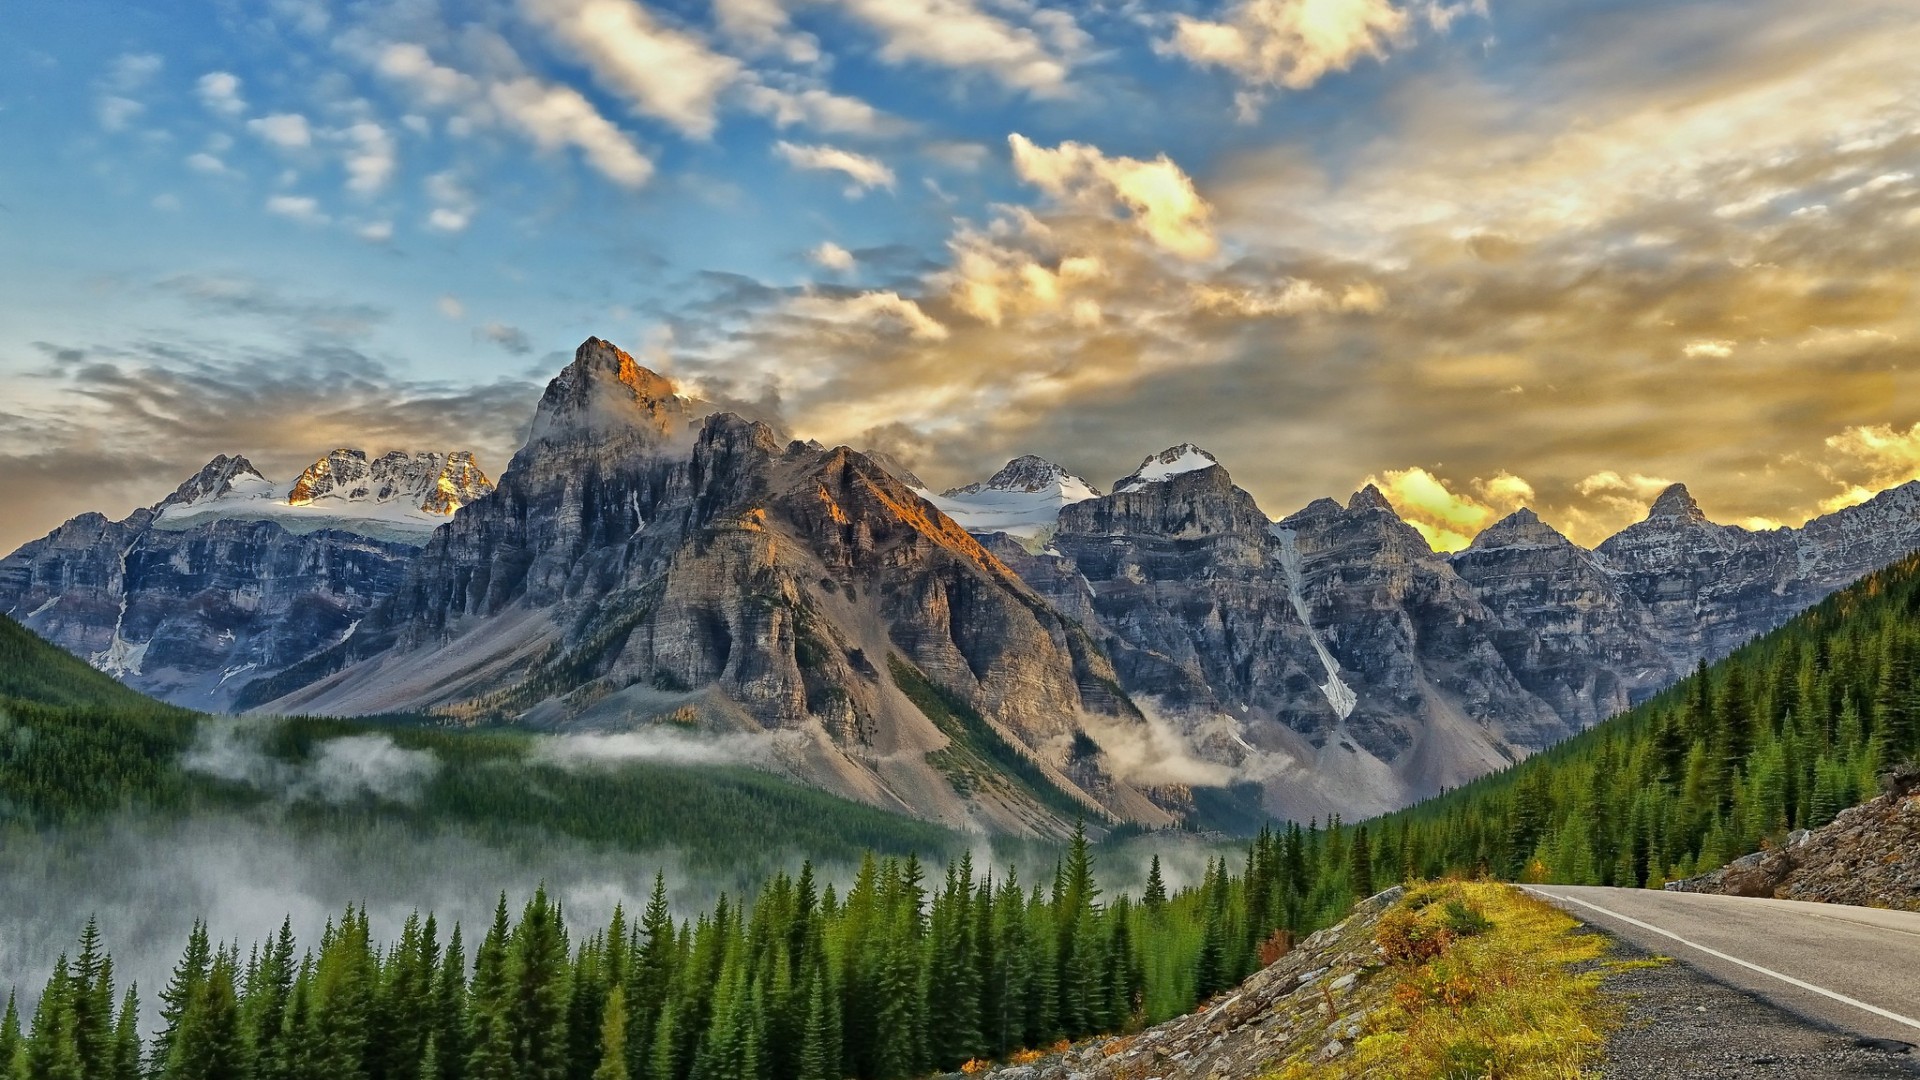 Landscape Background In High Quality Mountain Range By